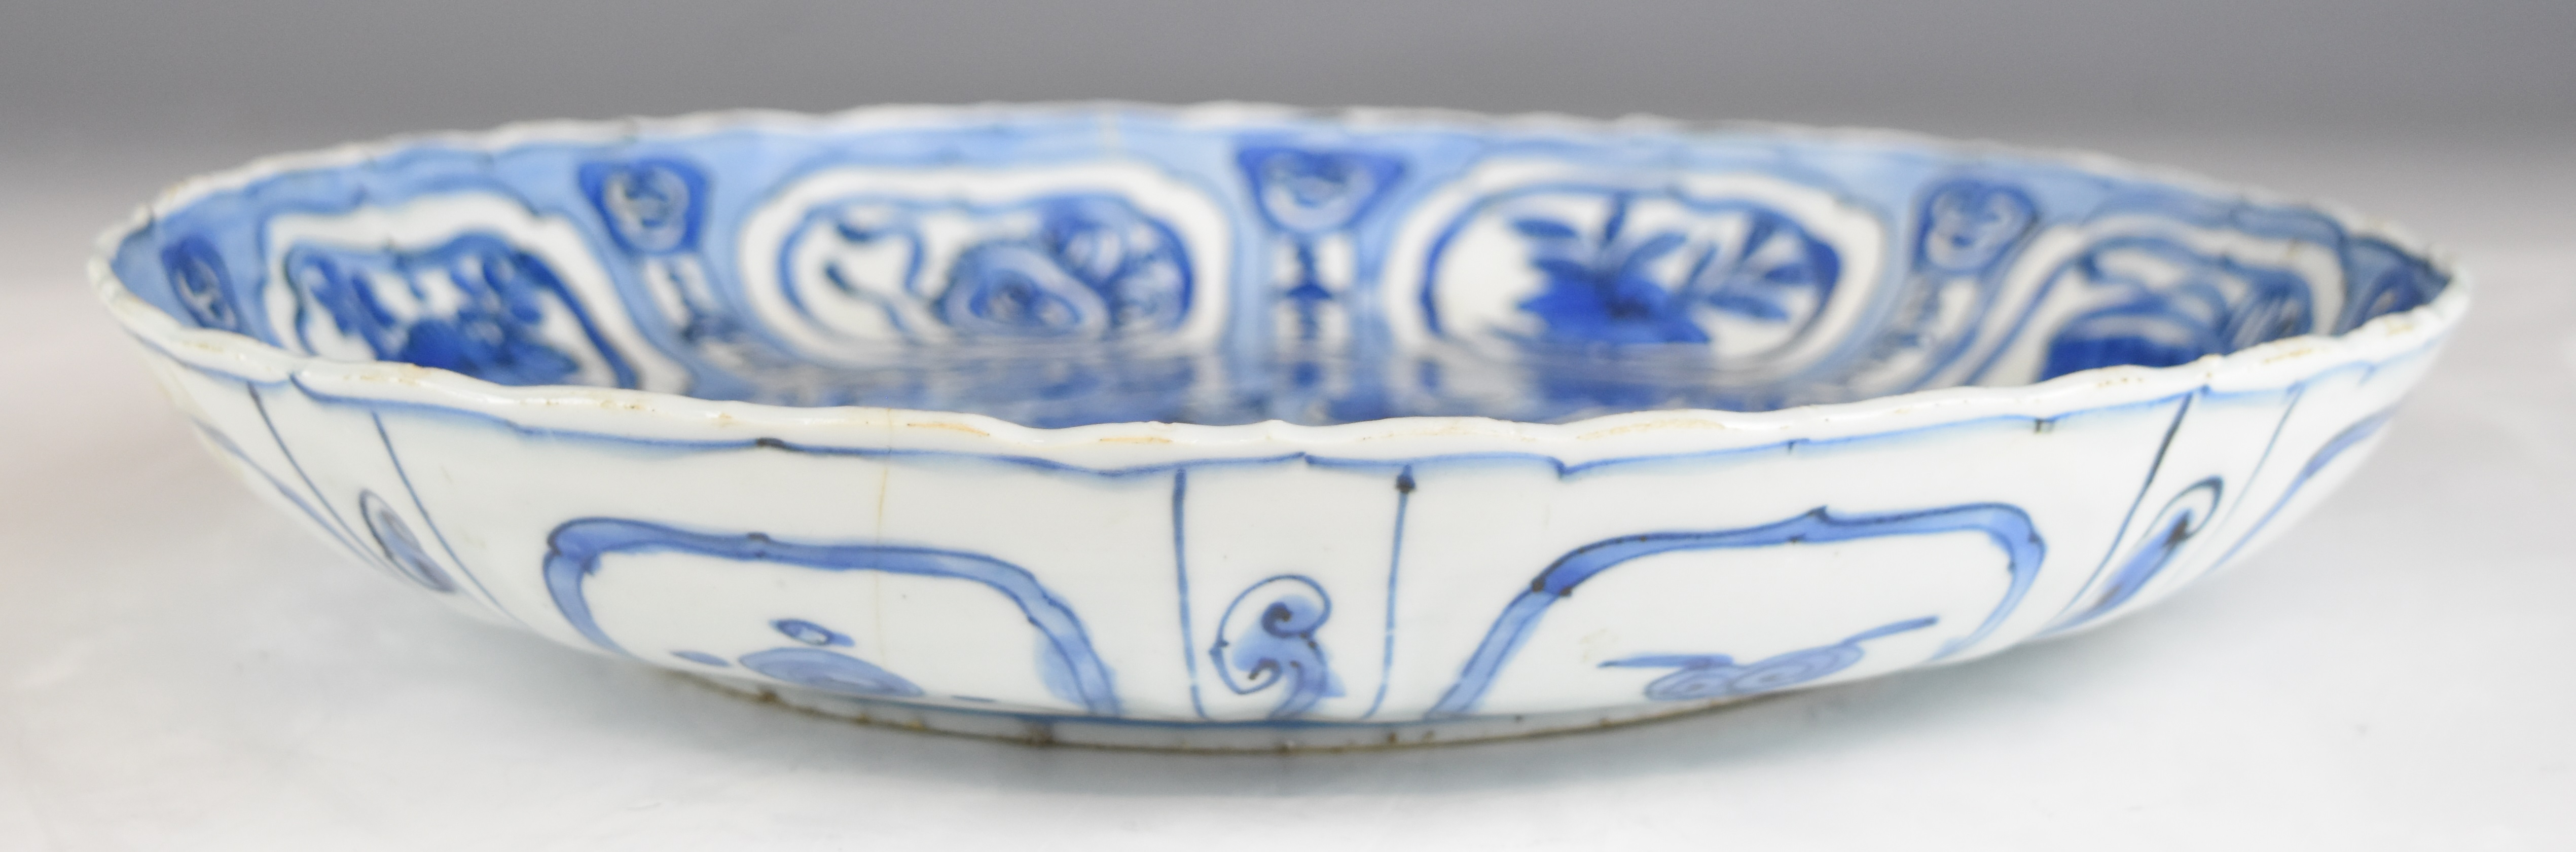 18th / 19thC Chinese Kraak porcelain charger with central decoration, diameter 31cm - Image 3 of 10